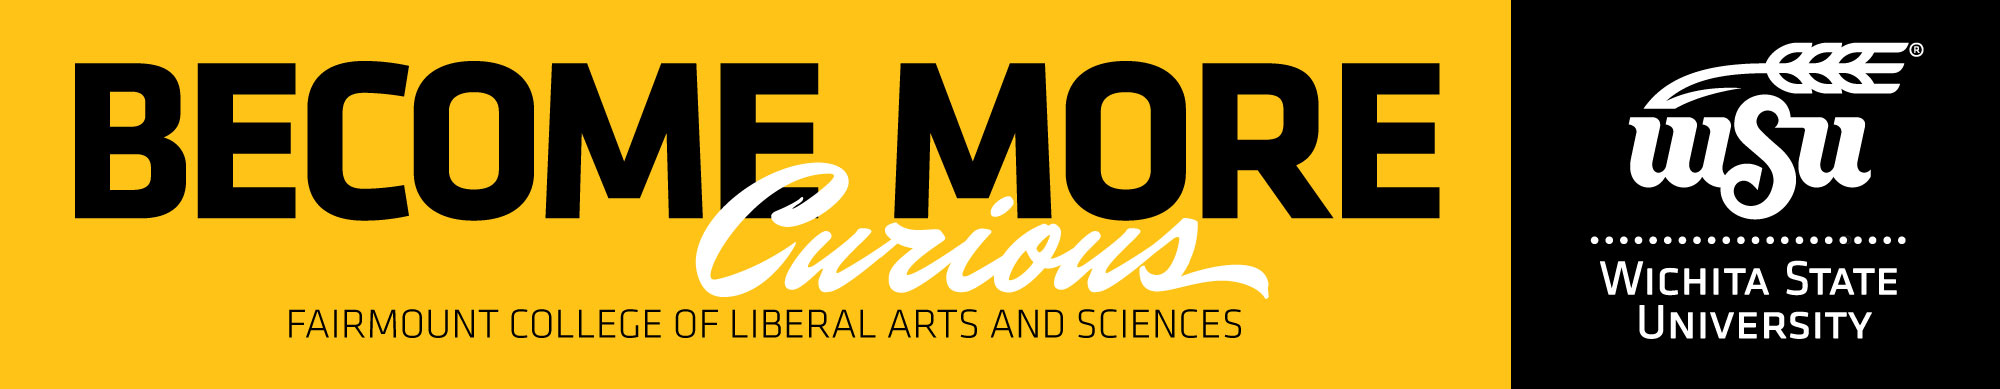 Become More - Fairmount College of Liberal Arts and Sciences - WSU Logo